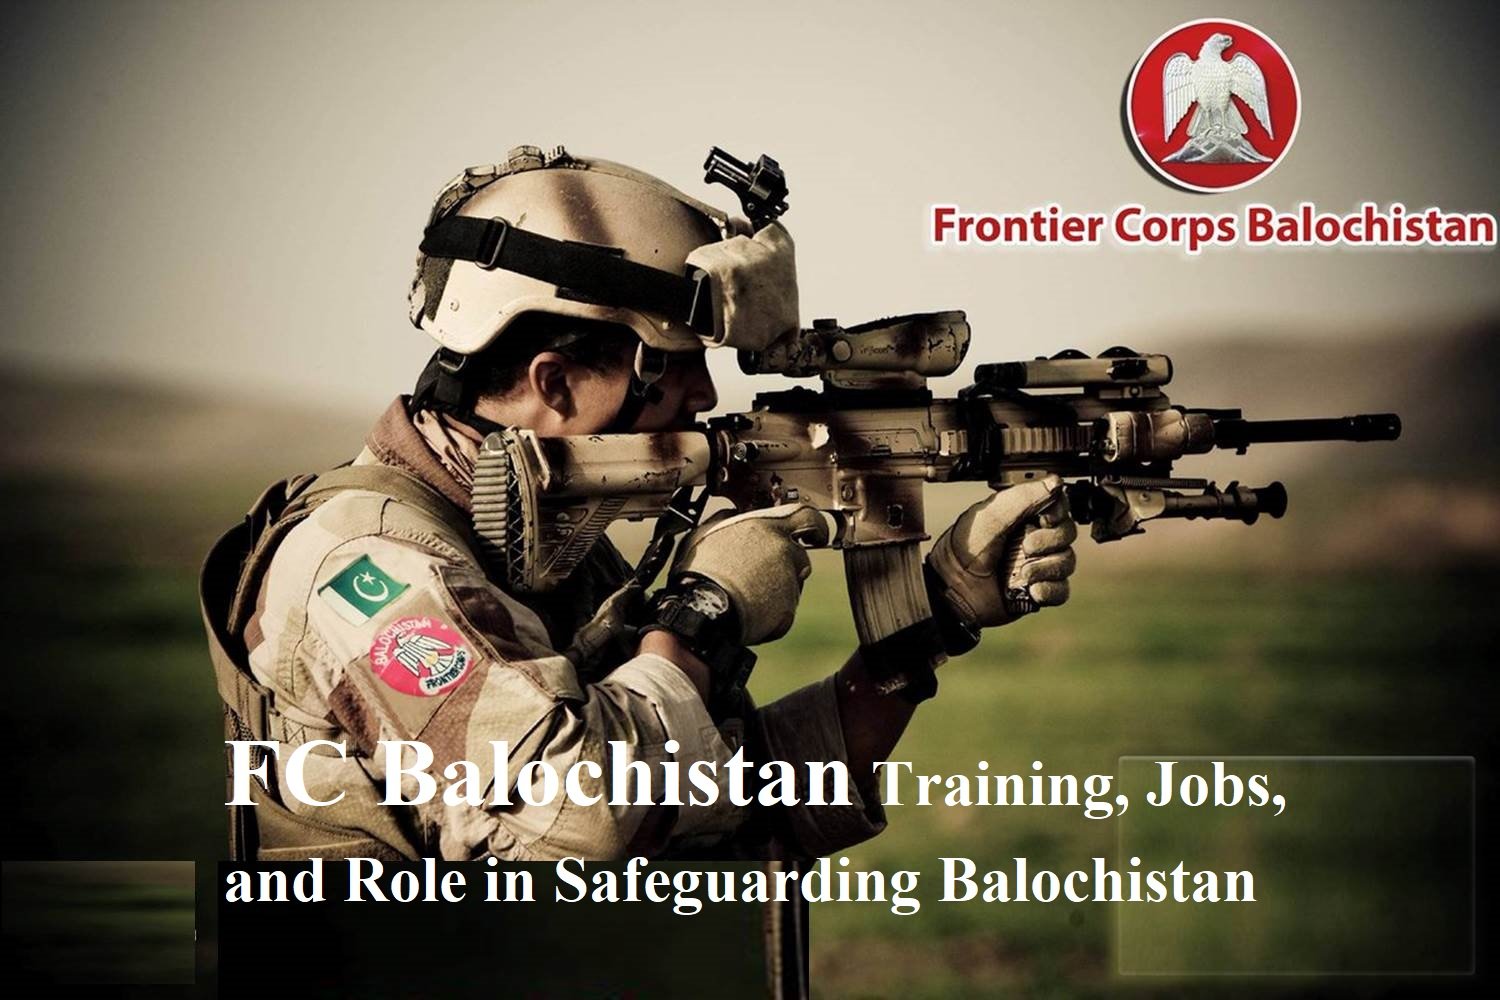 FC Balochistan Training, Jobs, and Role in Safeguarding Balochistan